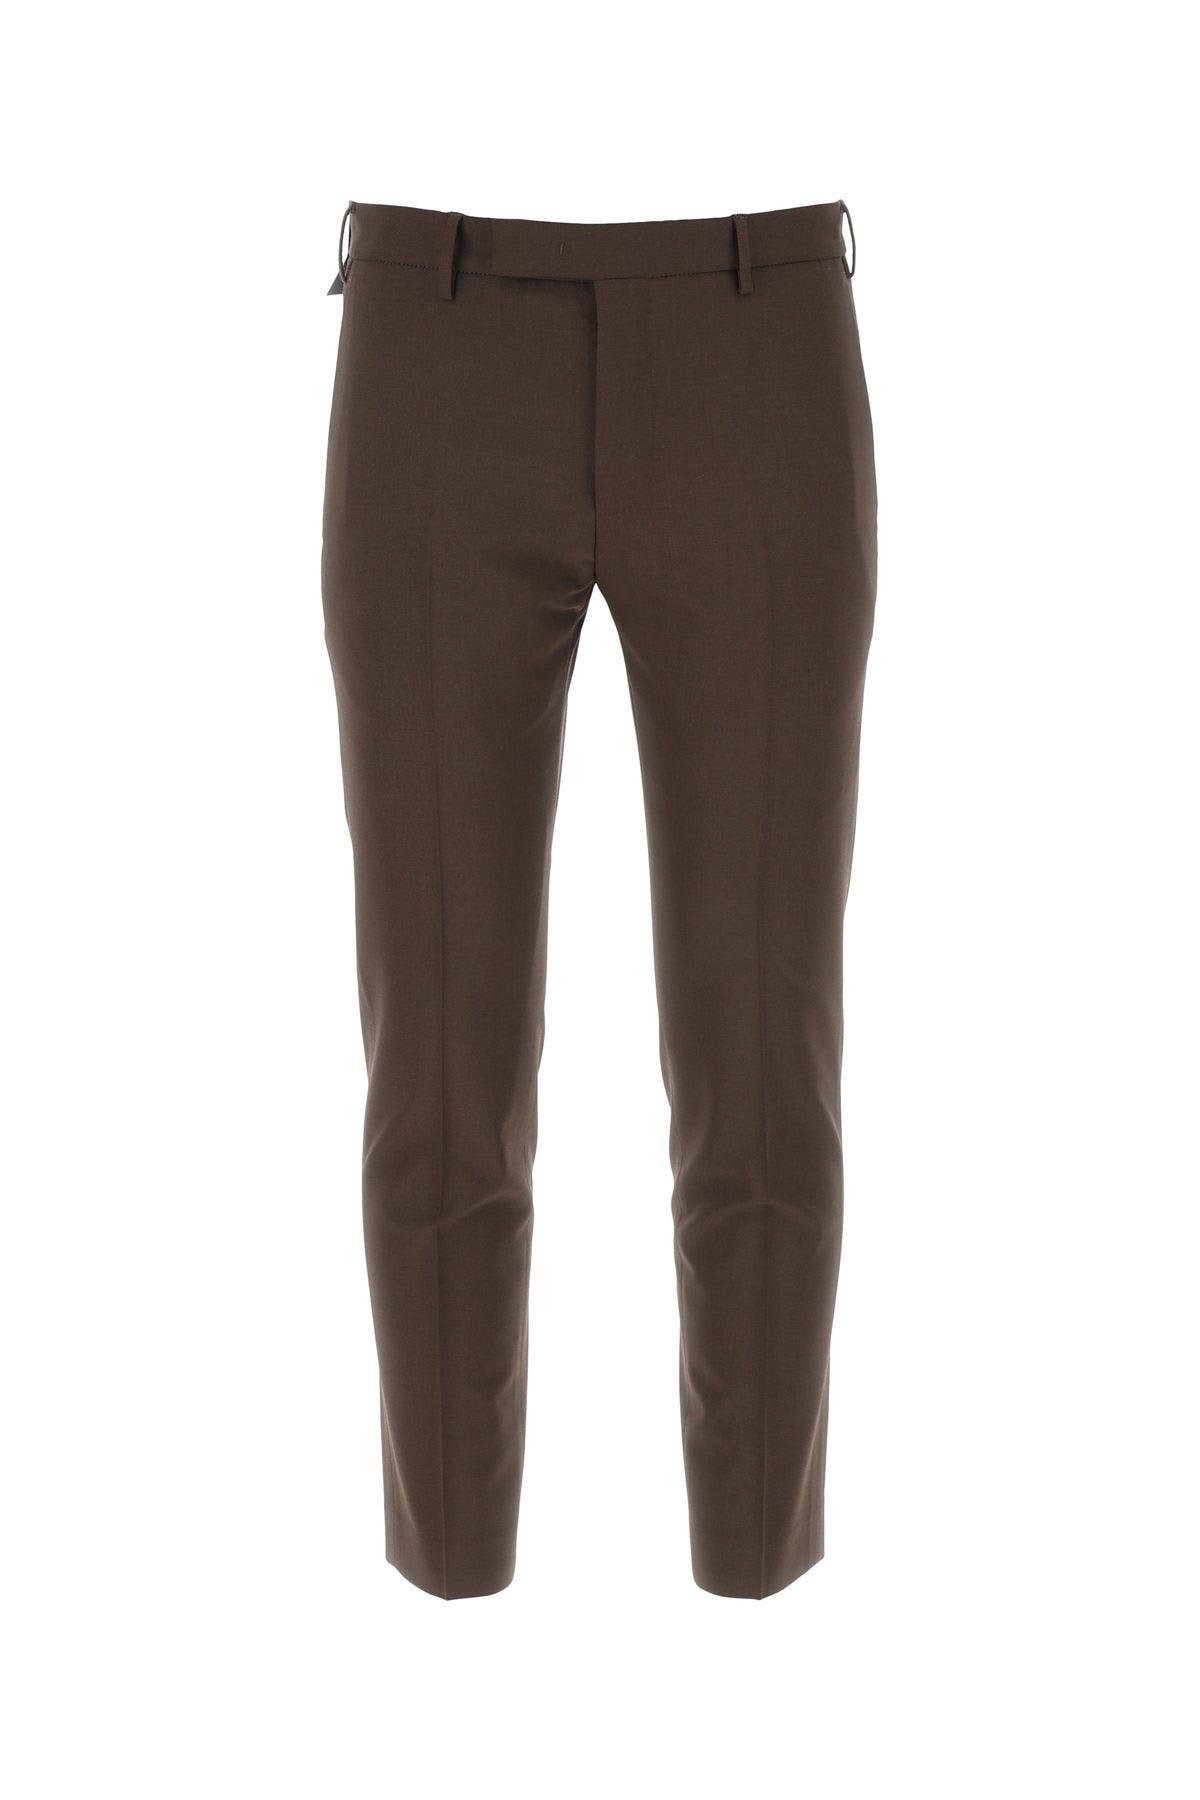 PT01 BROWN STRETCH WOOL CIGARETTE PANT